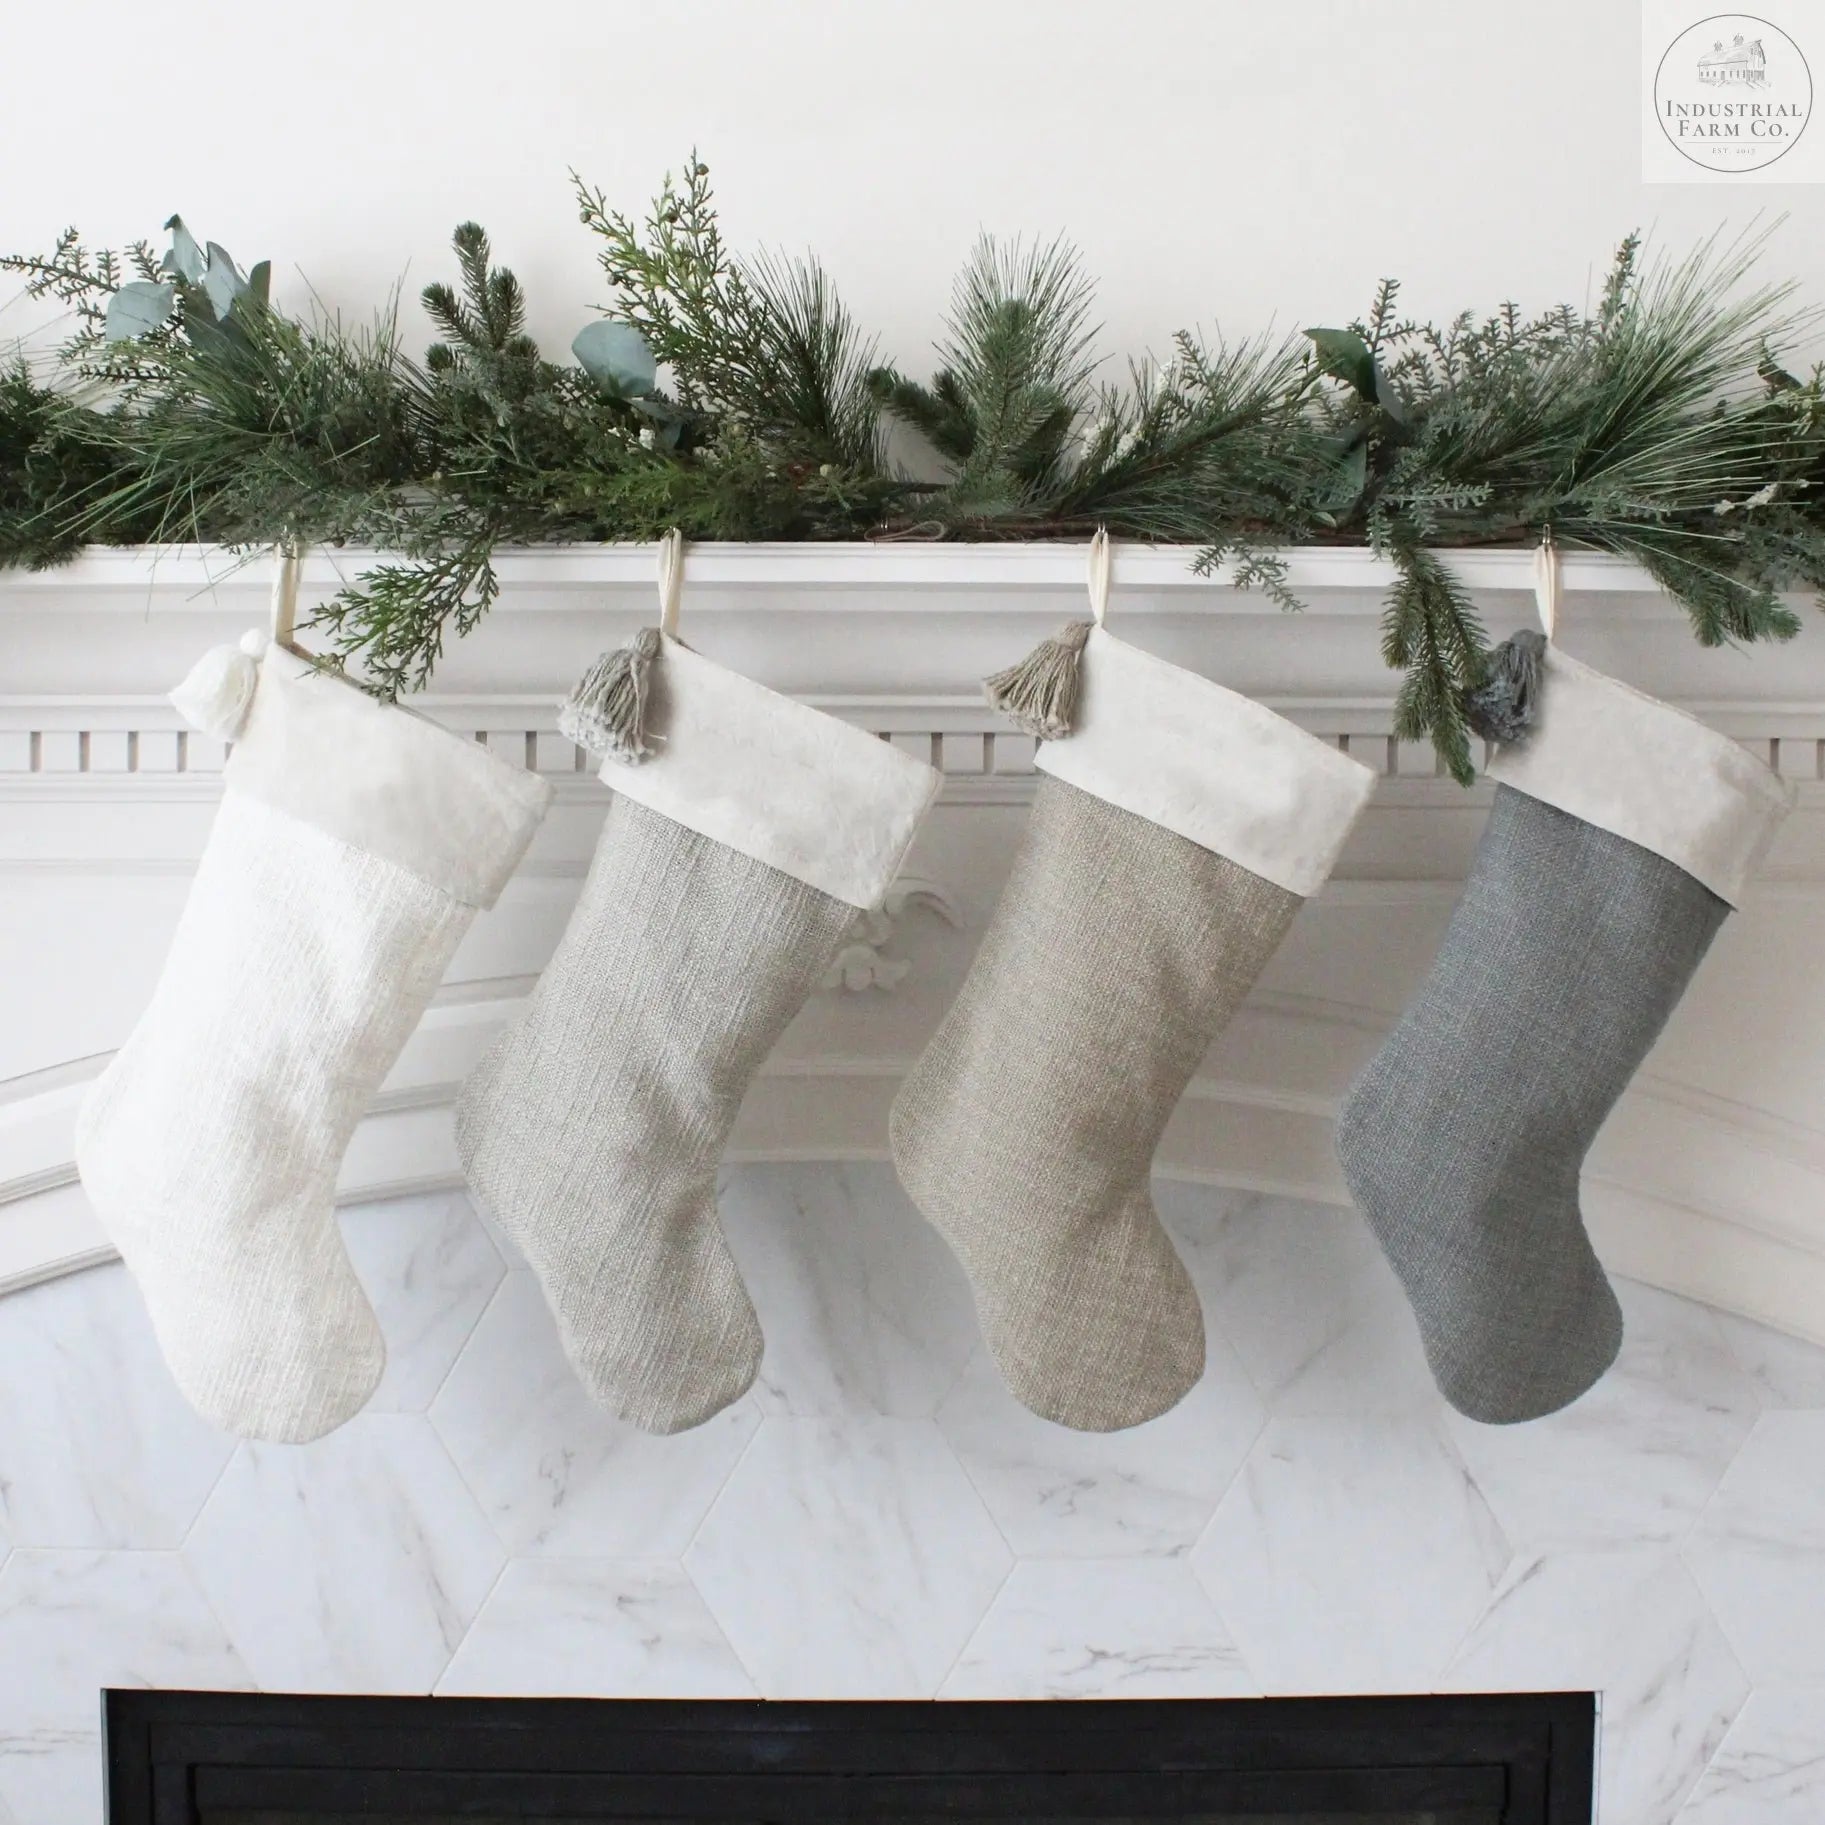 The Farmhouse Handwoven Stocking  Ivory   | Industrial Farm Co